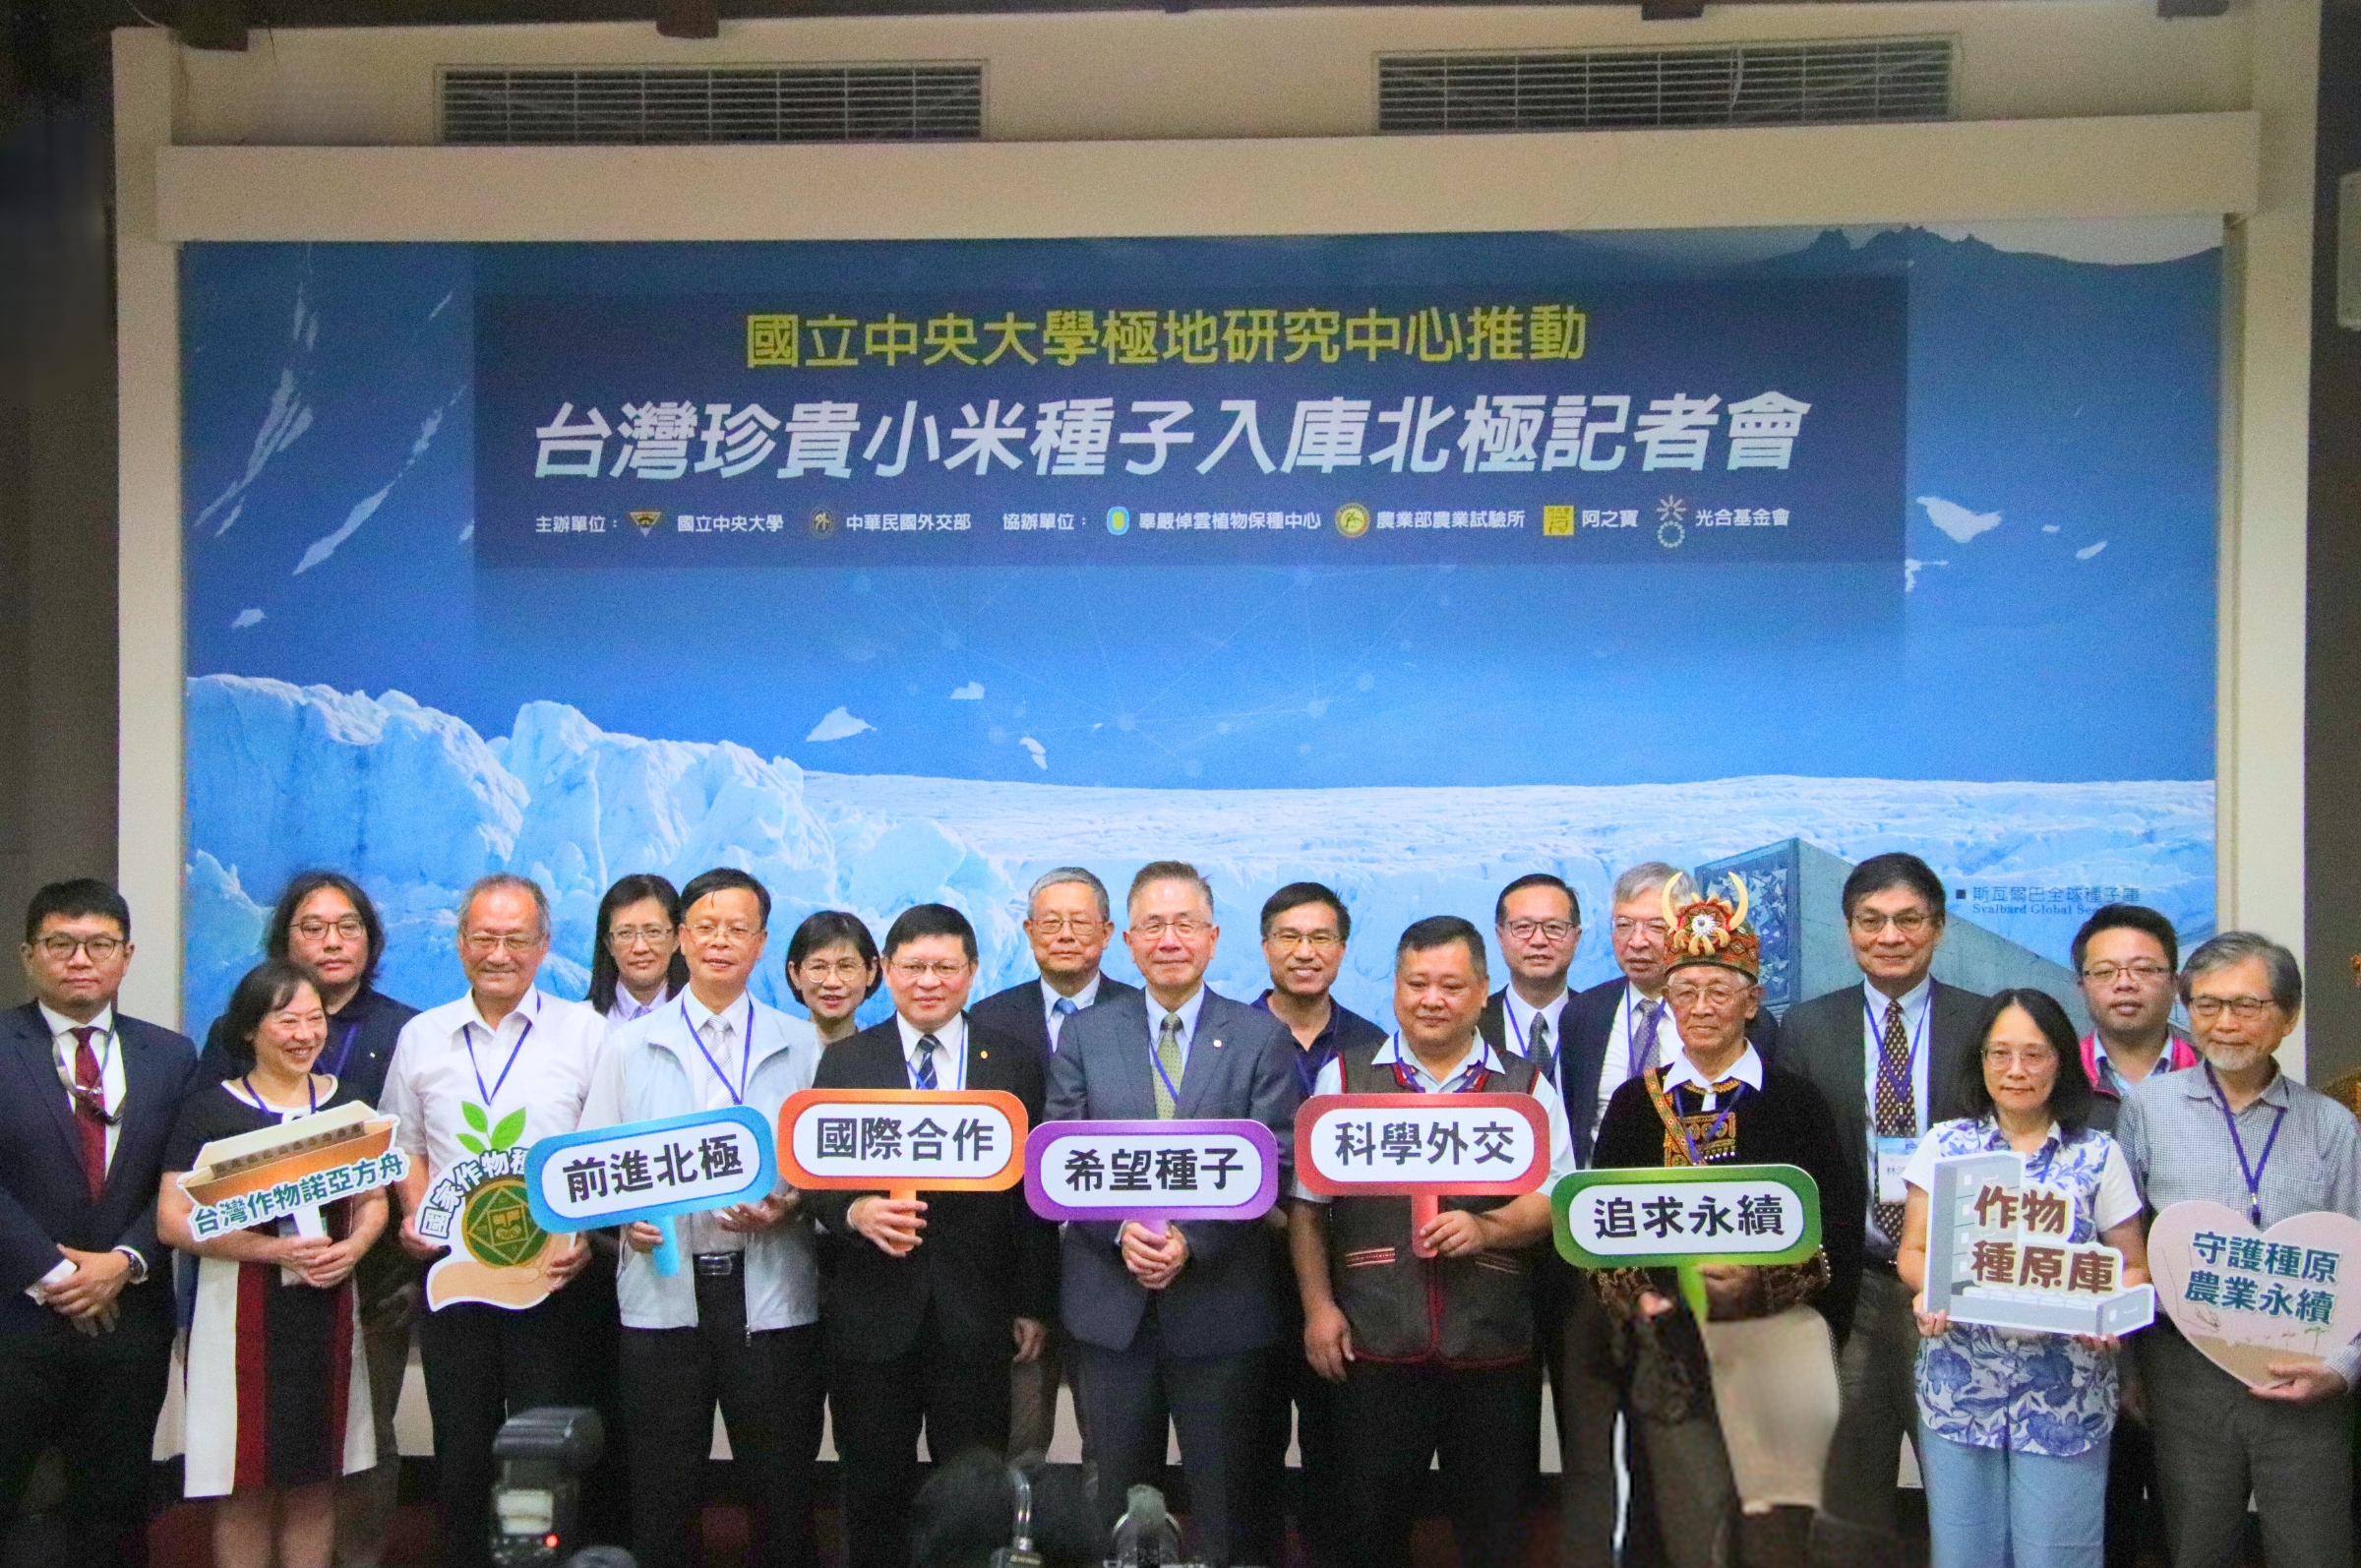 Taiwan Polar institute of National Central University promotes the deposit of precious Taiwanese millet seeds into arctic Seed Vault in pursuit of sustainability